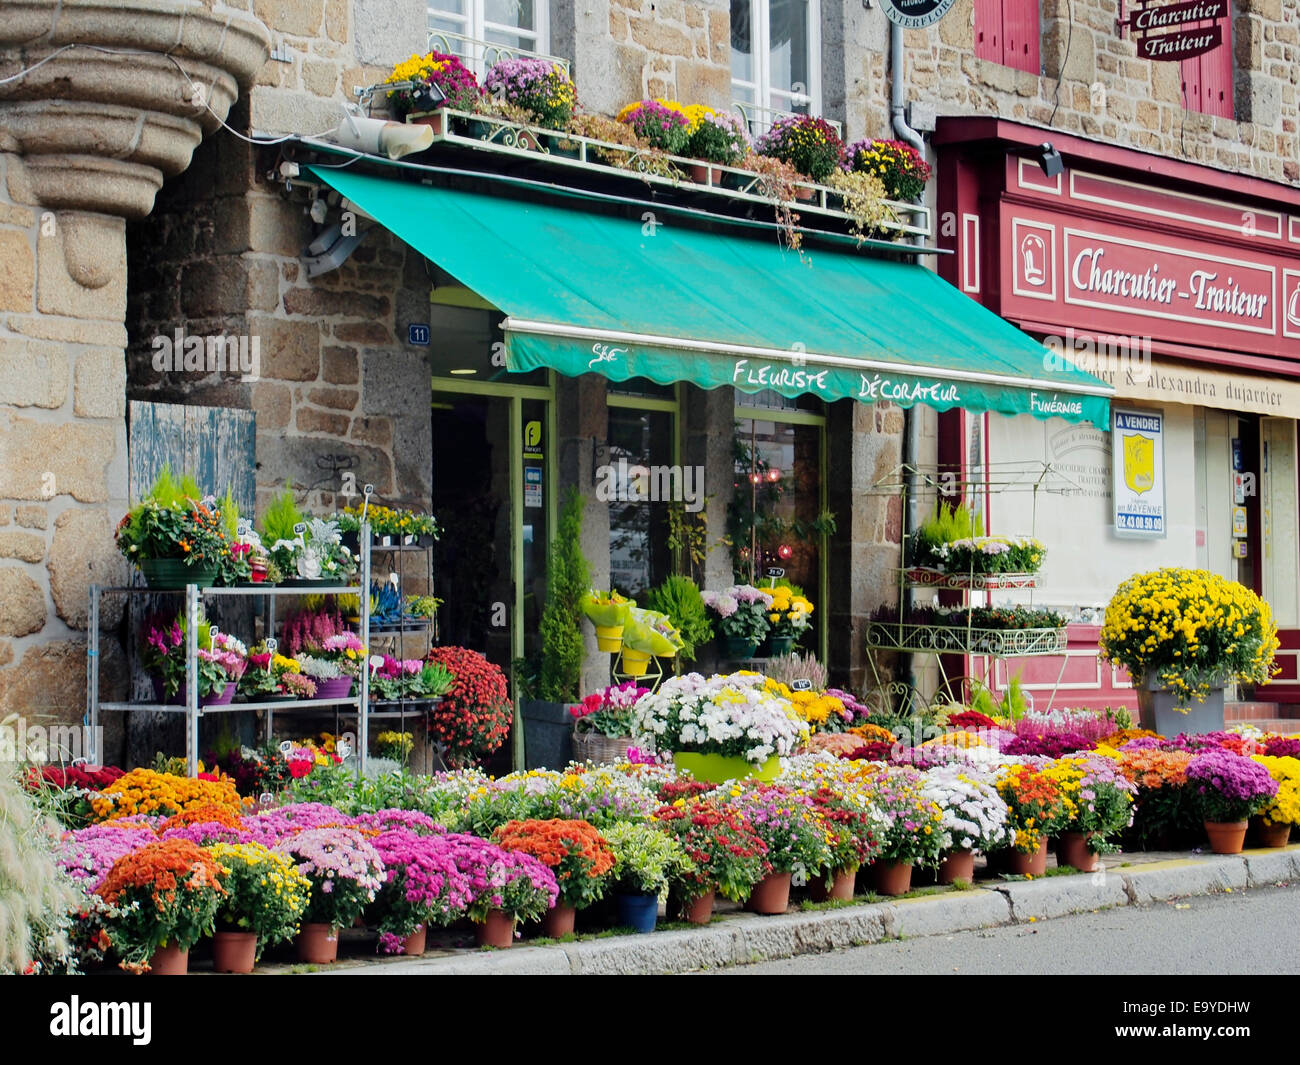 A flower shop in a pretty stone building in the market place of the small town of Lassay-les-Châteaux, Mayenne, France Stock Photo